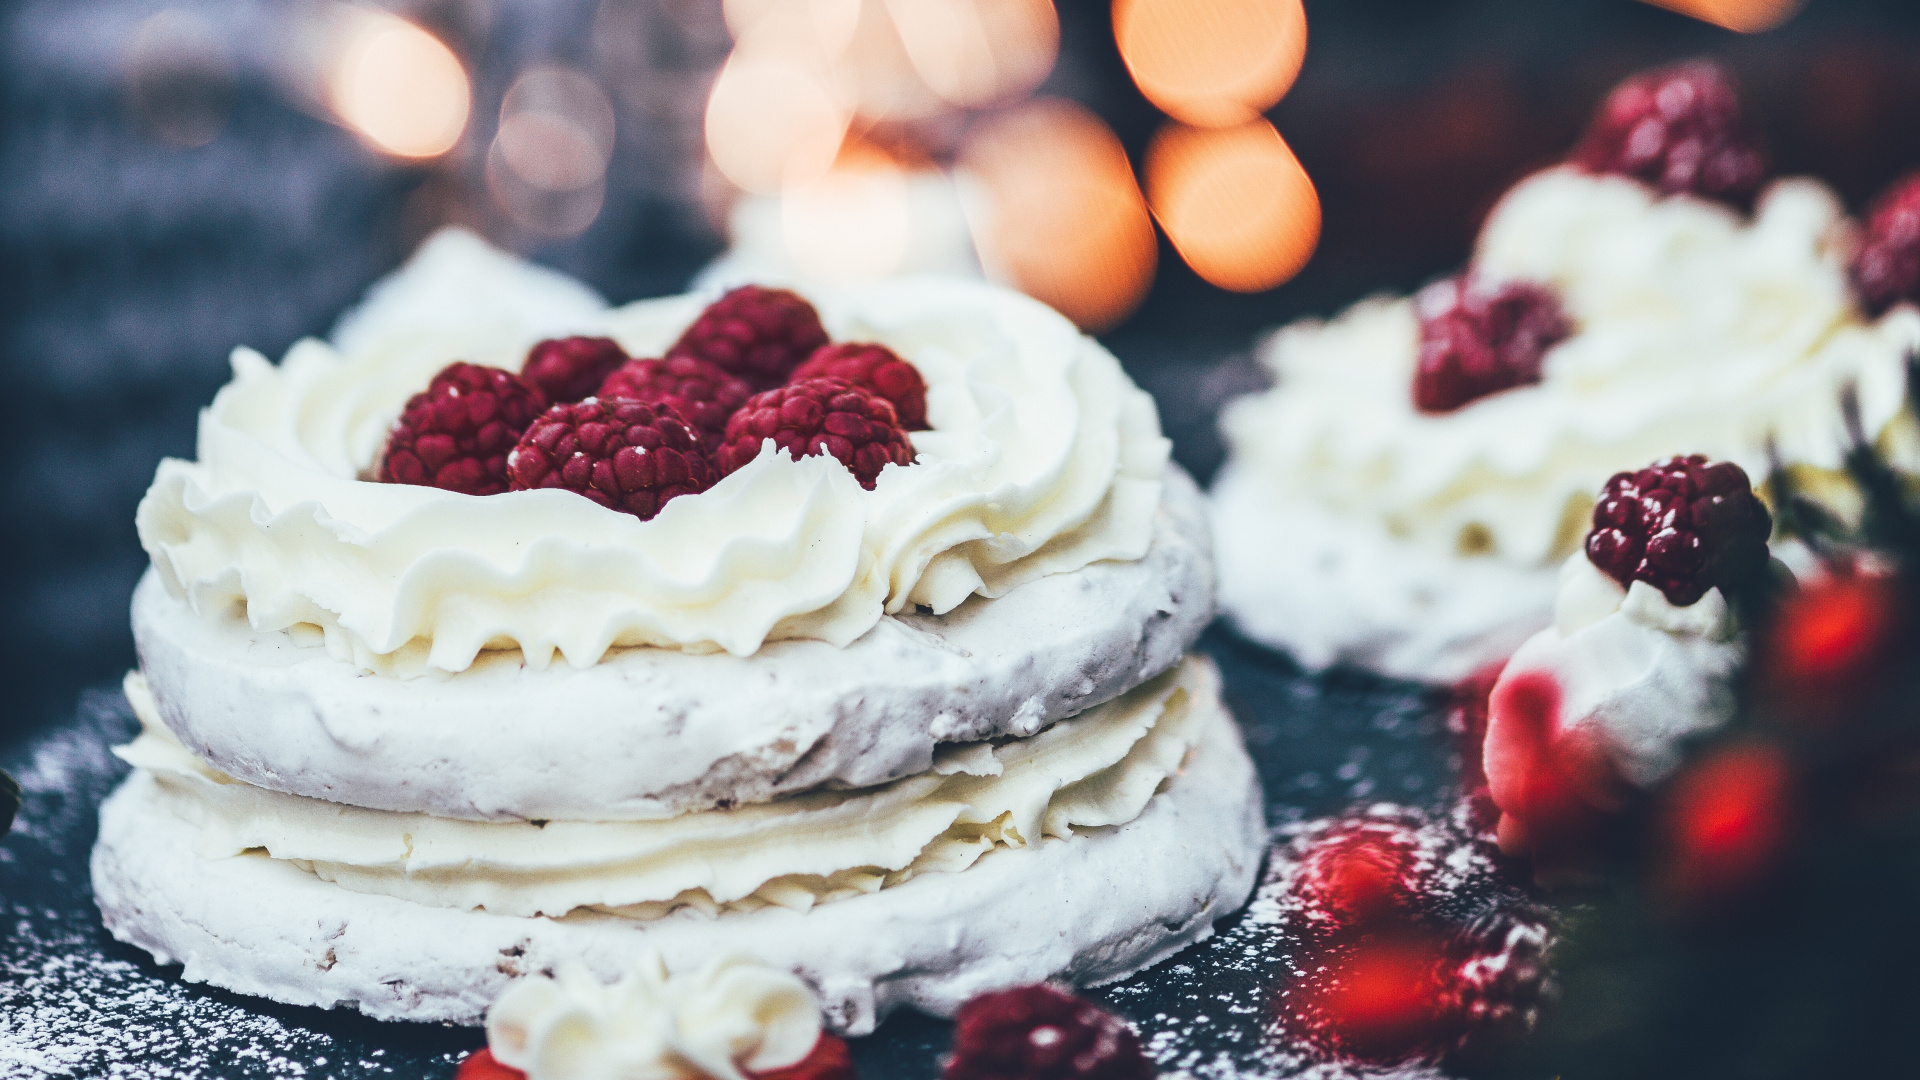 White and Red Cake With Red and White Sprinkles on Top. Wallpaper in 1920x1080 Resolution